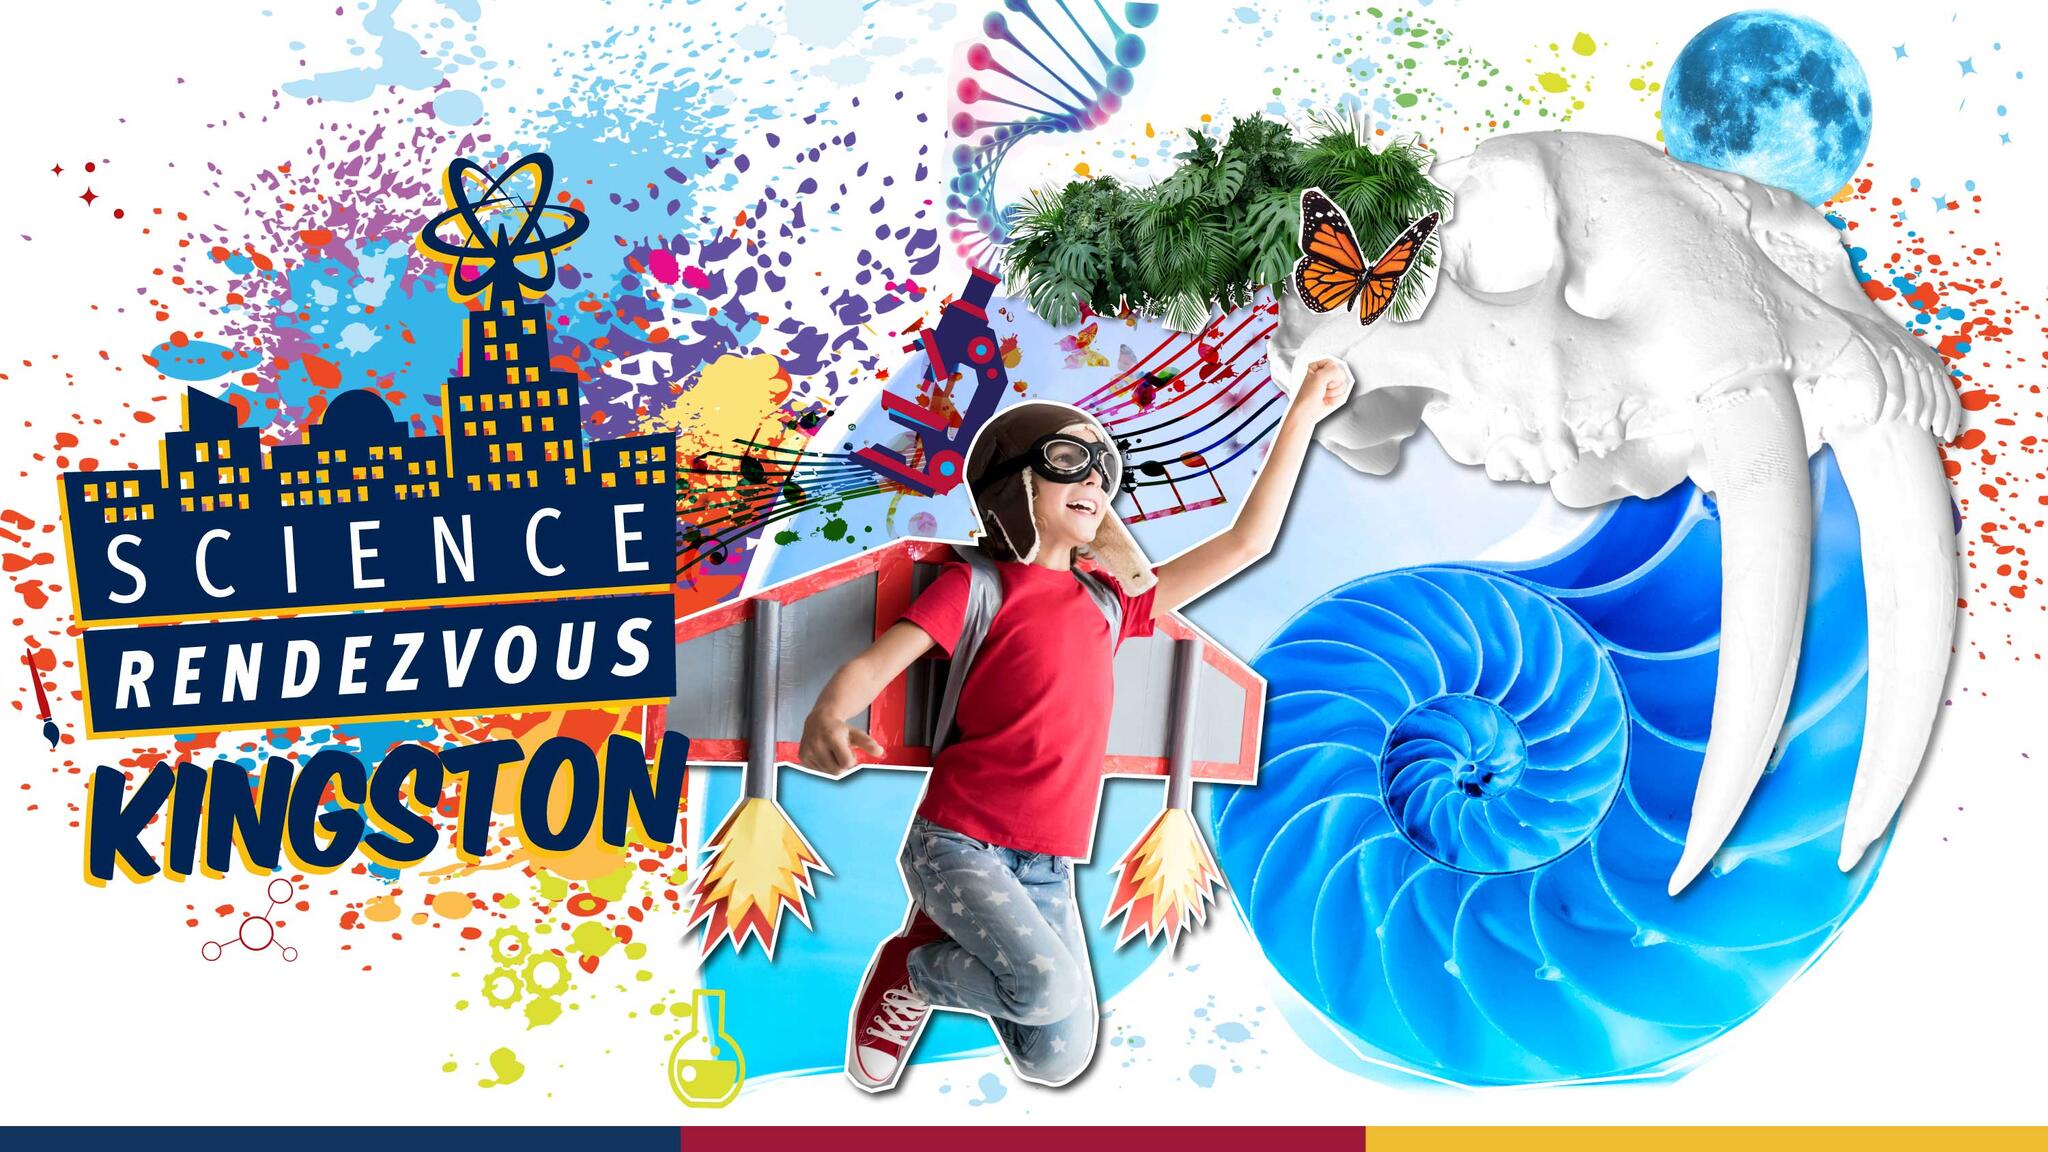 Decorative image showing a child with a cardboard jetpack chasing a butterfly. The image also includes a DNA strand and fossils and the Science Rendezvous Kingston logo.